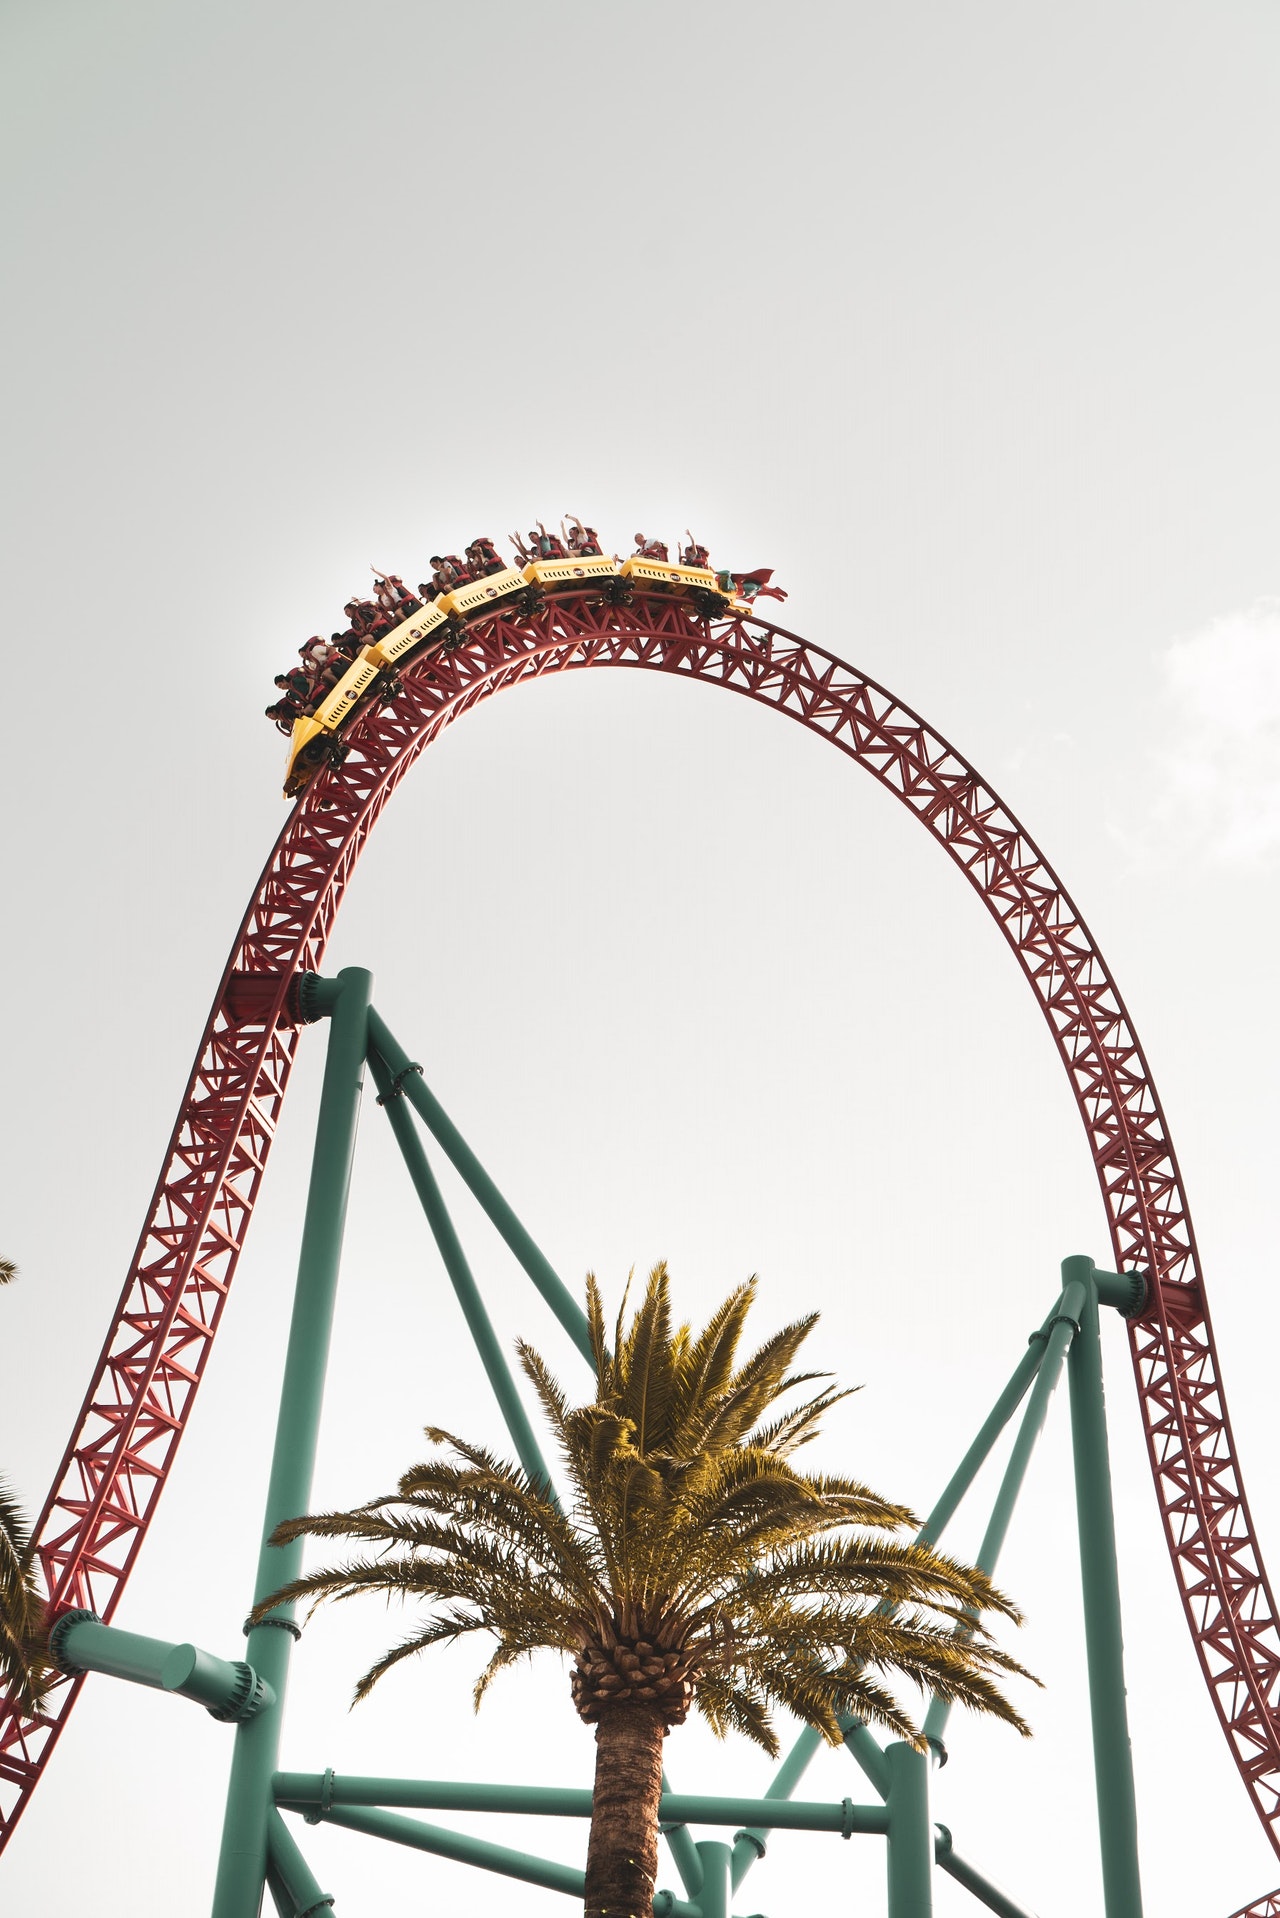 7 Surprising Ways To Avoid Motion Sickness at Amusement Parks - Motioneaze